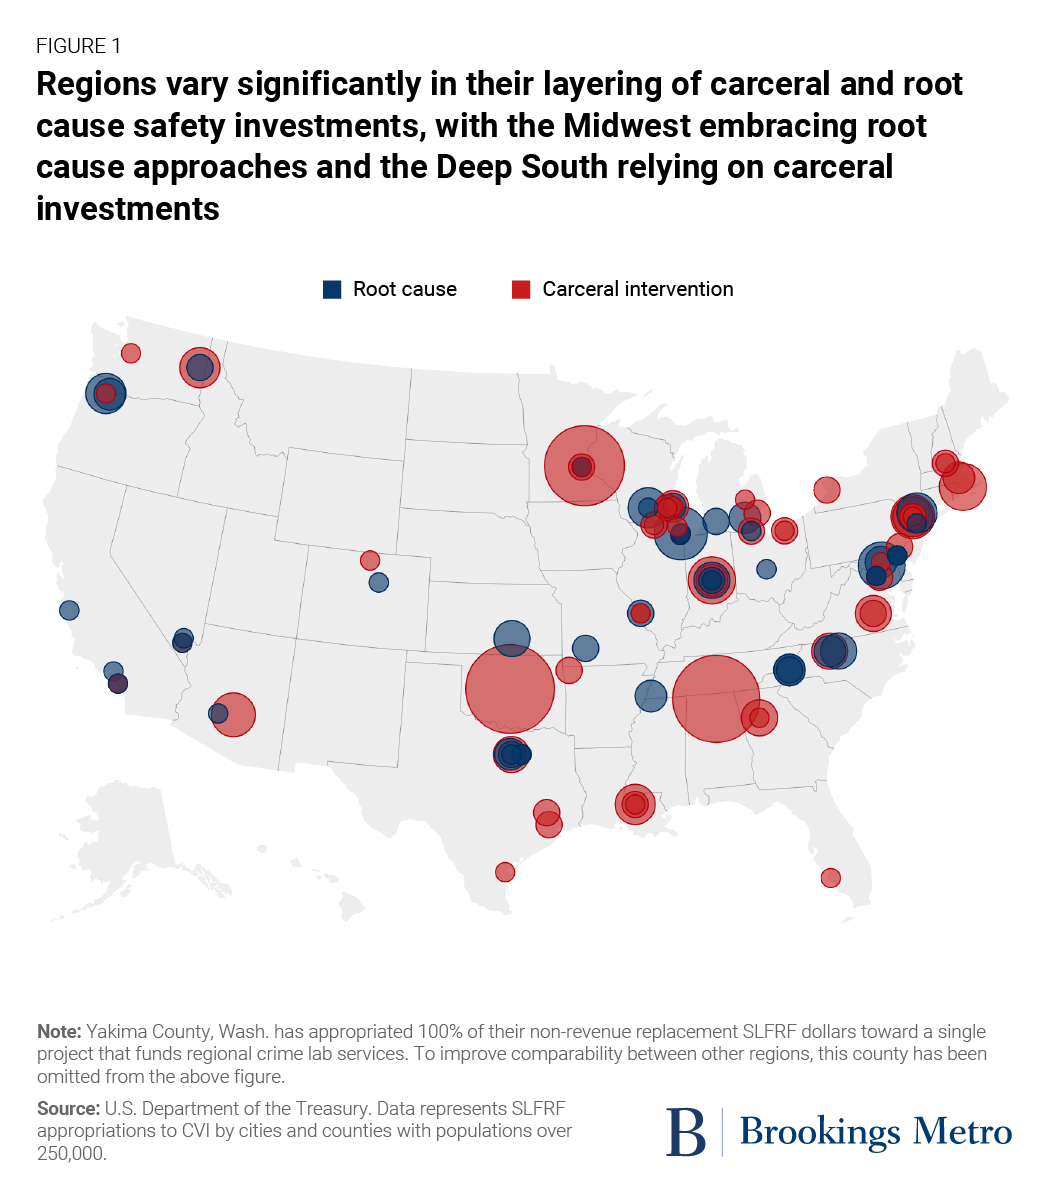 Figure 2. Regions vary significantly in their layering of carceral and root cause safety investments, with the Midwest embracing root cause approaches and the Deep South relying on carceral investments